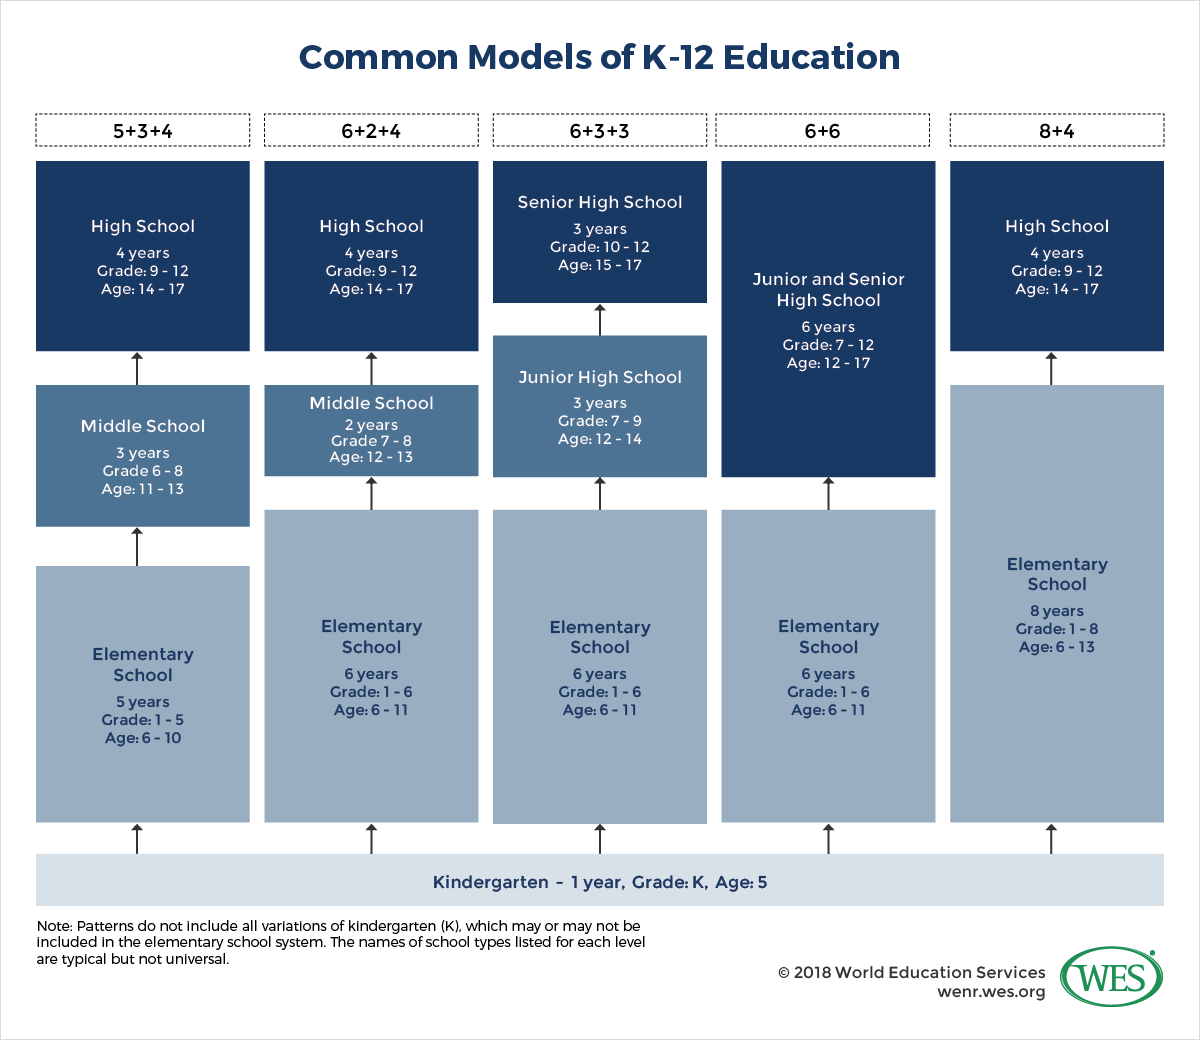 An infographic showing common models of K to 12 education in the U.S.